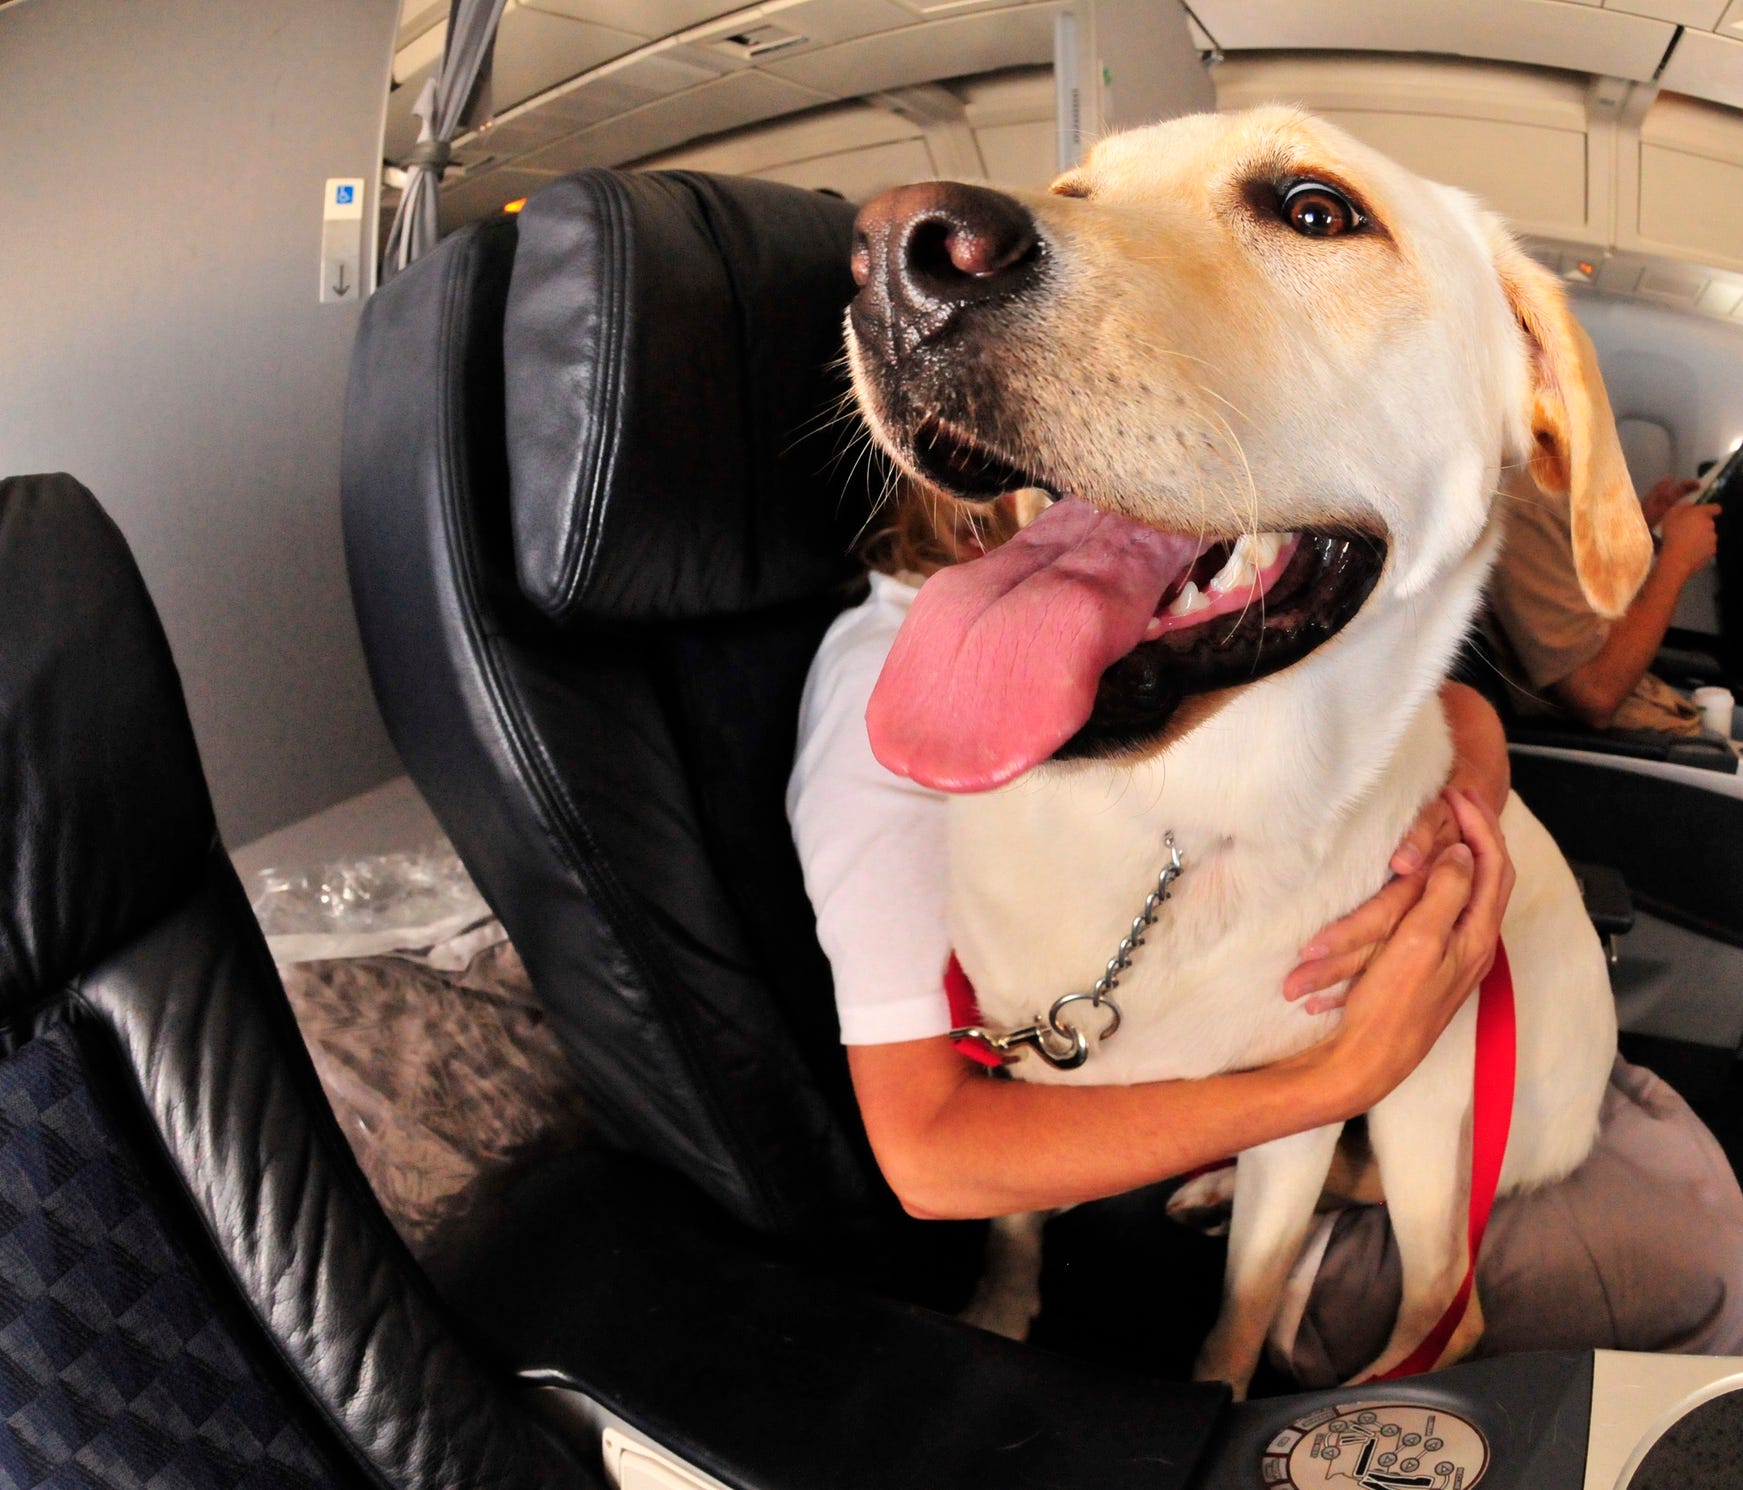 American Airlines tightened its policy Monday for passengers bringing emotional-support animals on flights. The animals must fit at the passenger's feet and not block an aisle, and the passenger much provide documentation certifying the need for the 